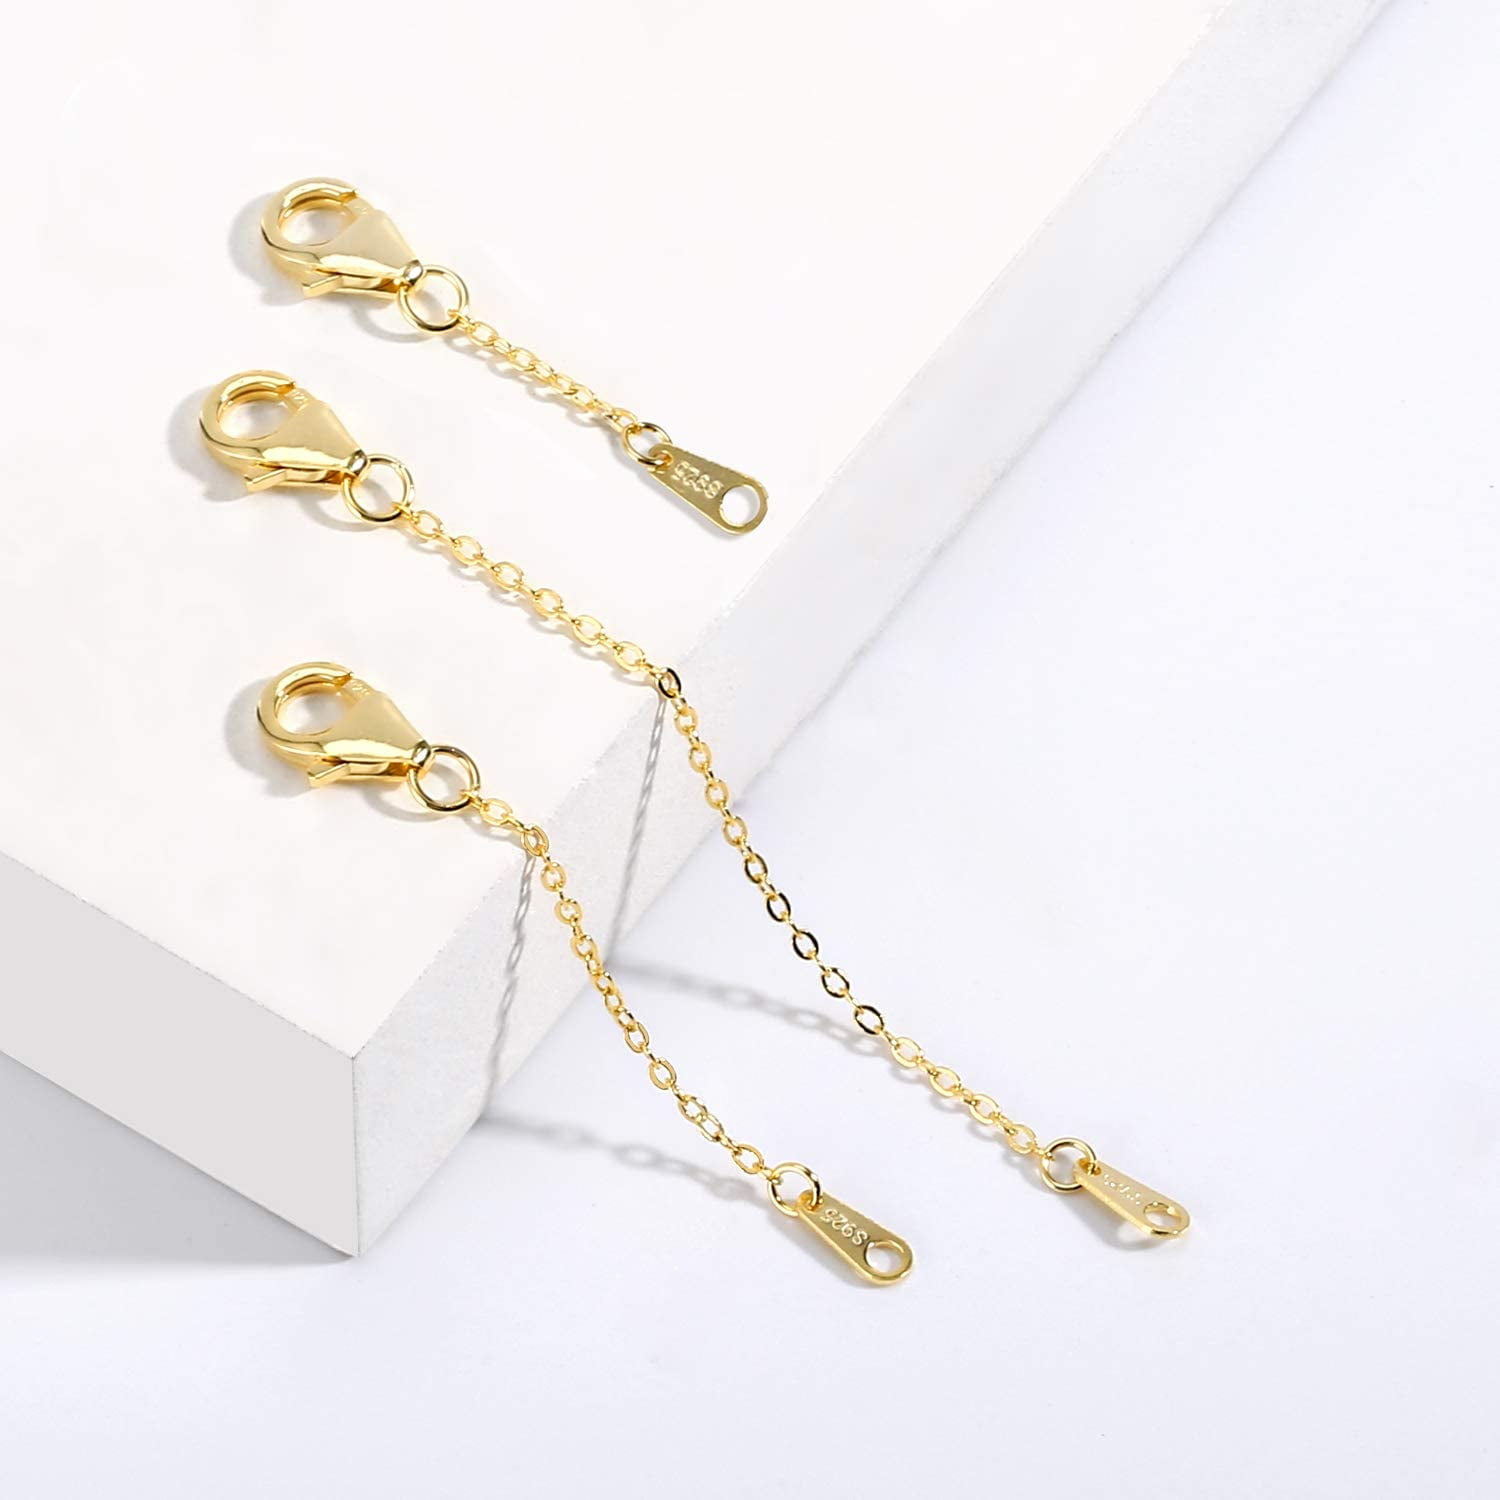  3PCS Necklace Extenders Gold, 3 Size Chain Extenders for  Necklaces Gold Necklace Extender, Stainless Steel Necklace Extenders, Pure  Silver Necklace Extender for Women Jewelry Necklace Bracelet : Arts, Crafts  & Sewing